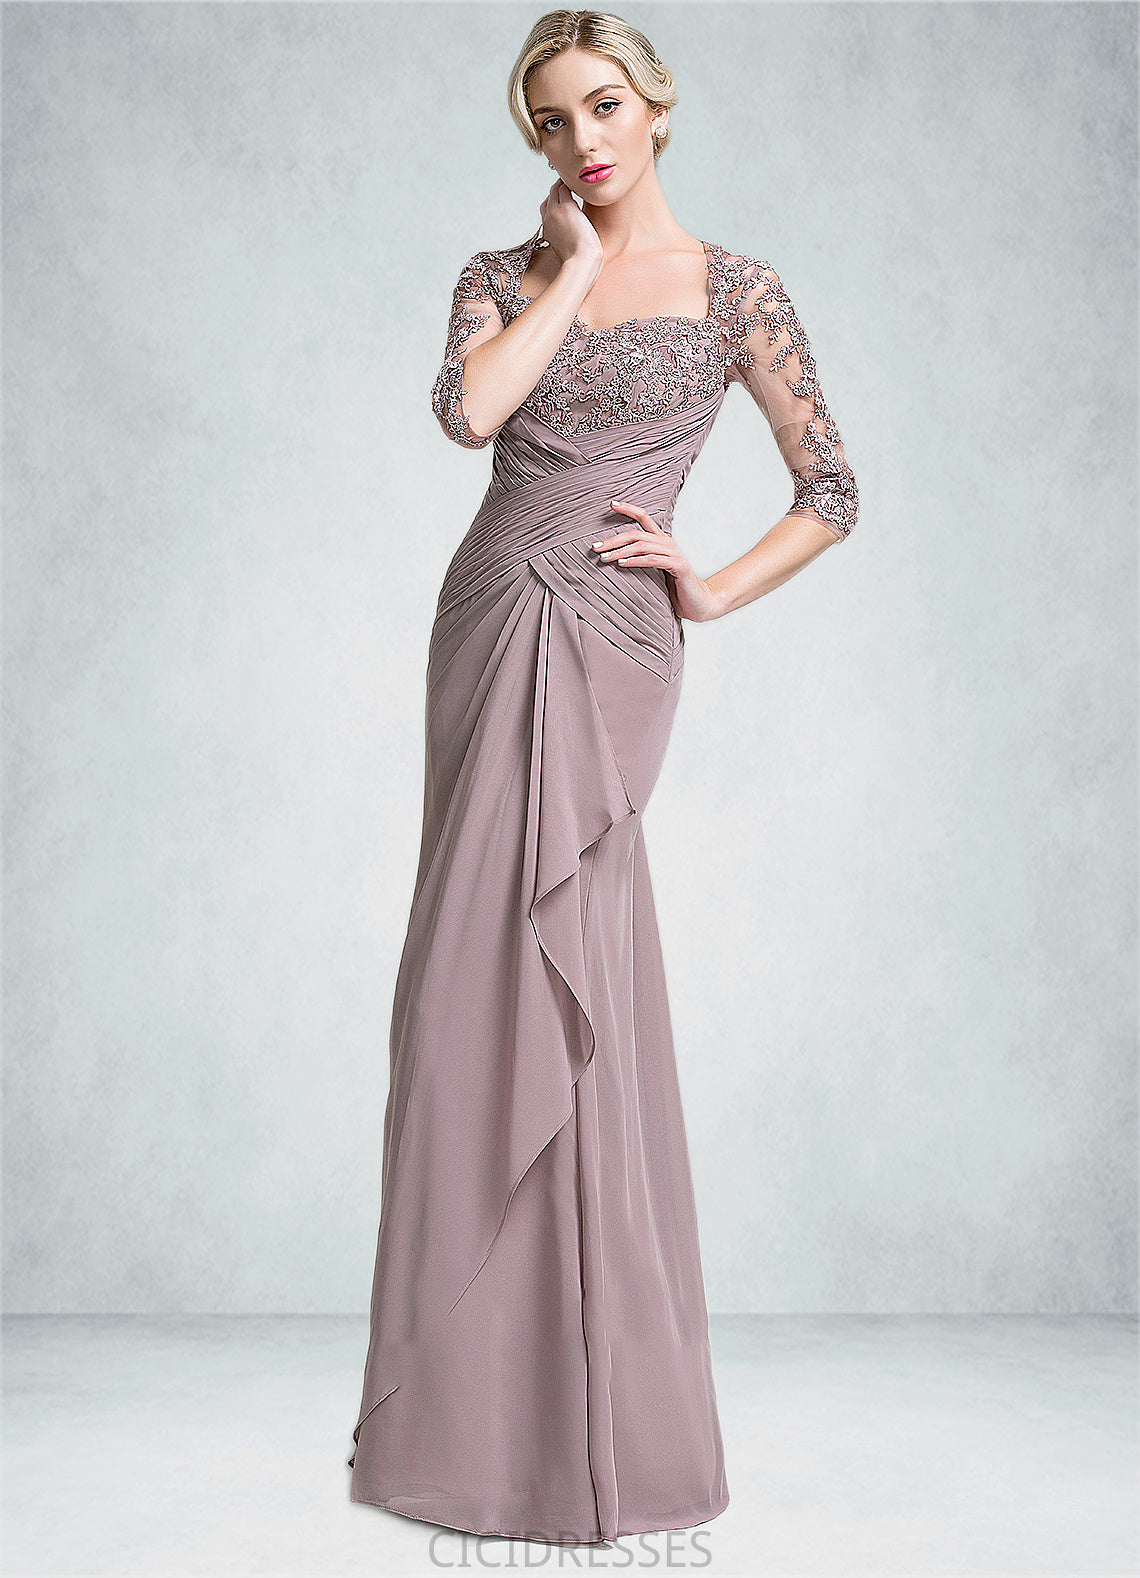 Lucy Trumpet/Mermaid Sweetheart Floor-Length Chiffon Mother of the Bride Dress With Ruffle Cascading Ruffles CIC8126P0014694